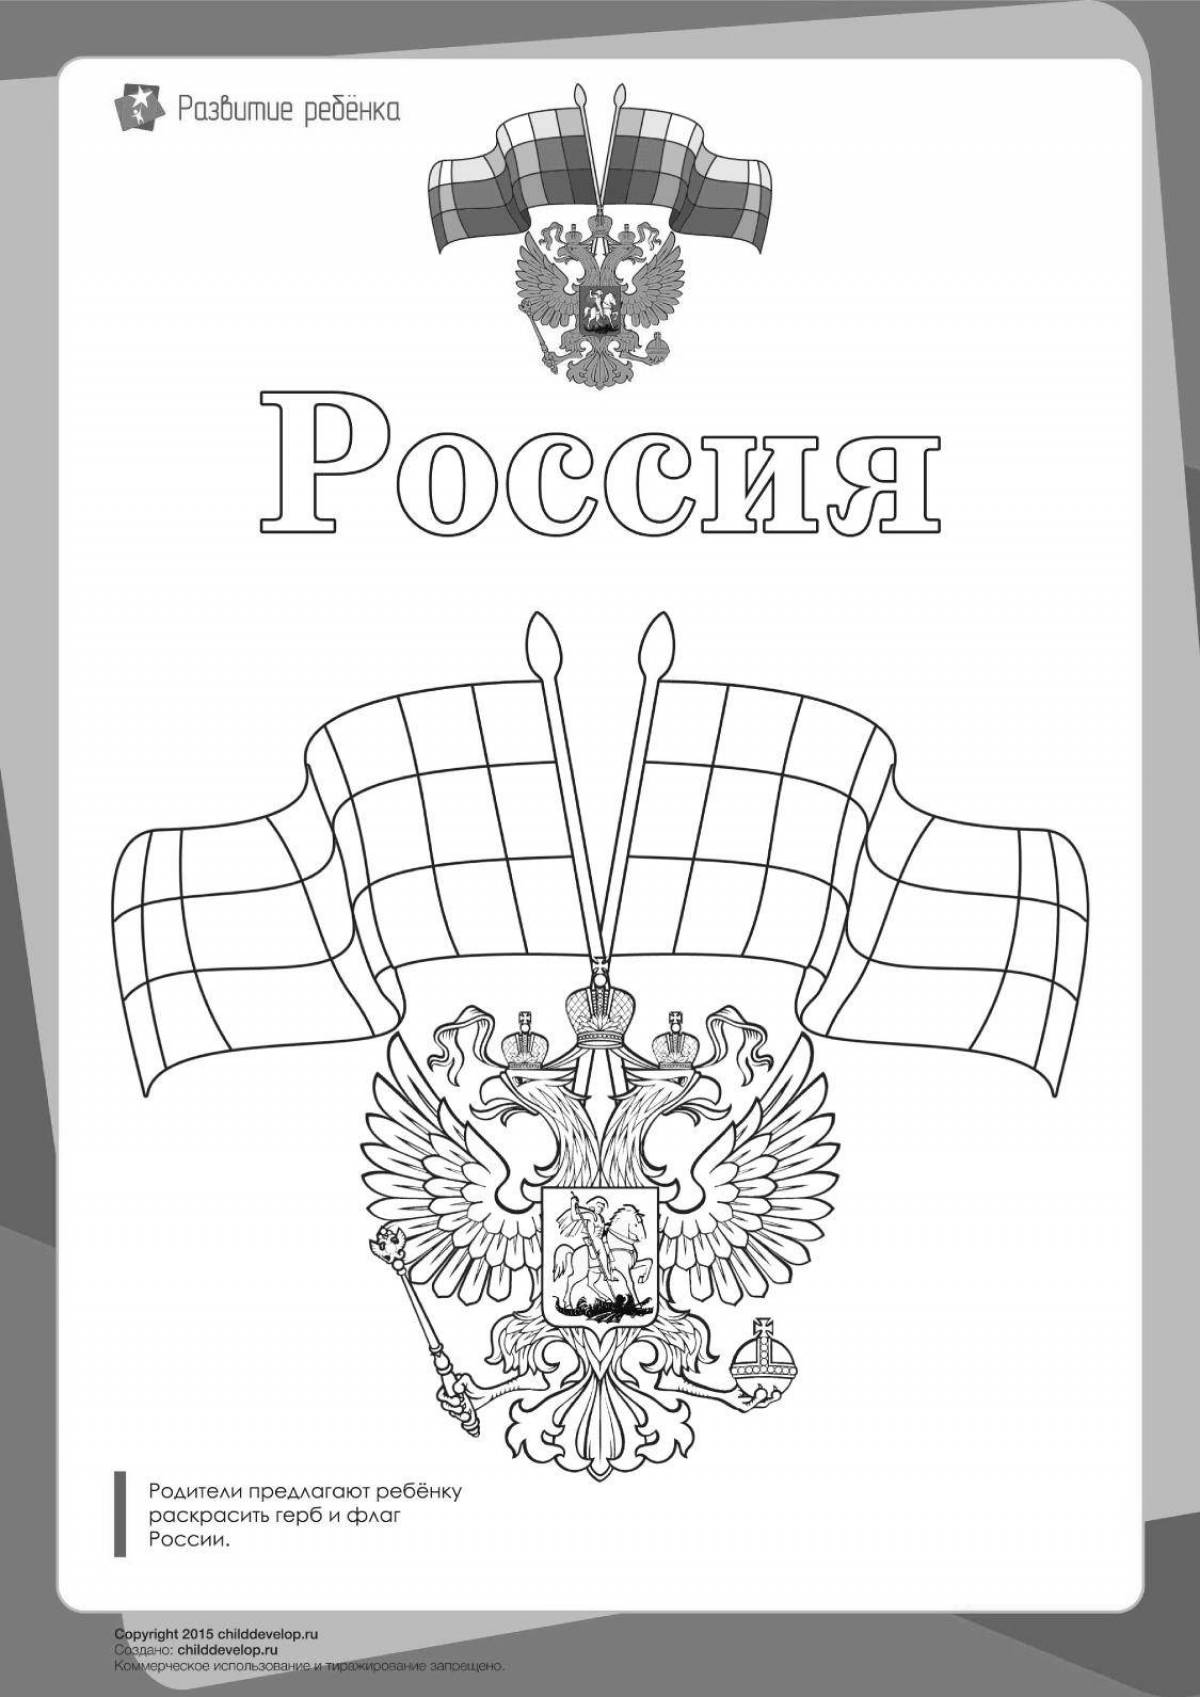 Living coat of arms of Russia for preschoolers